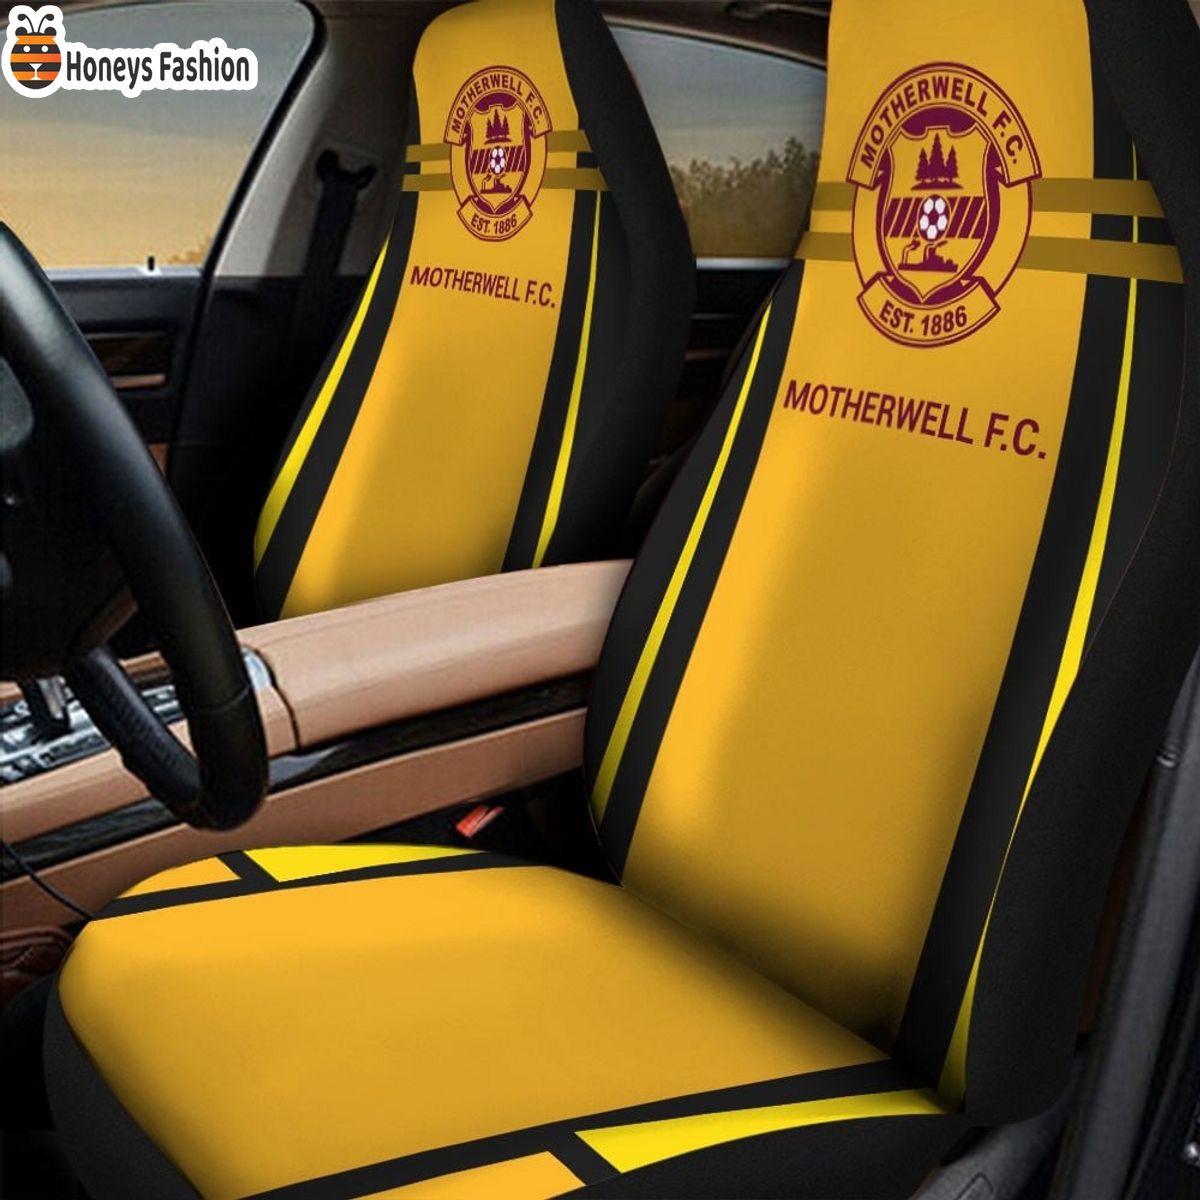 Motherwell F.C. car seat cover